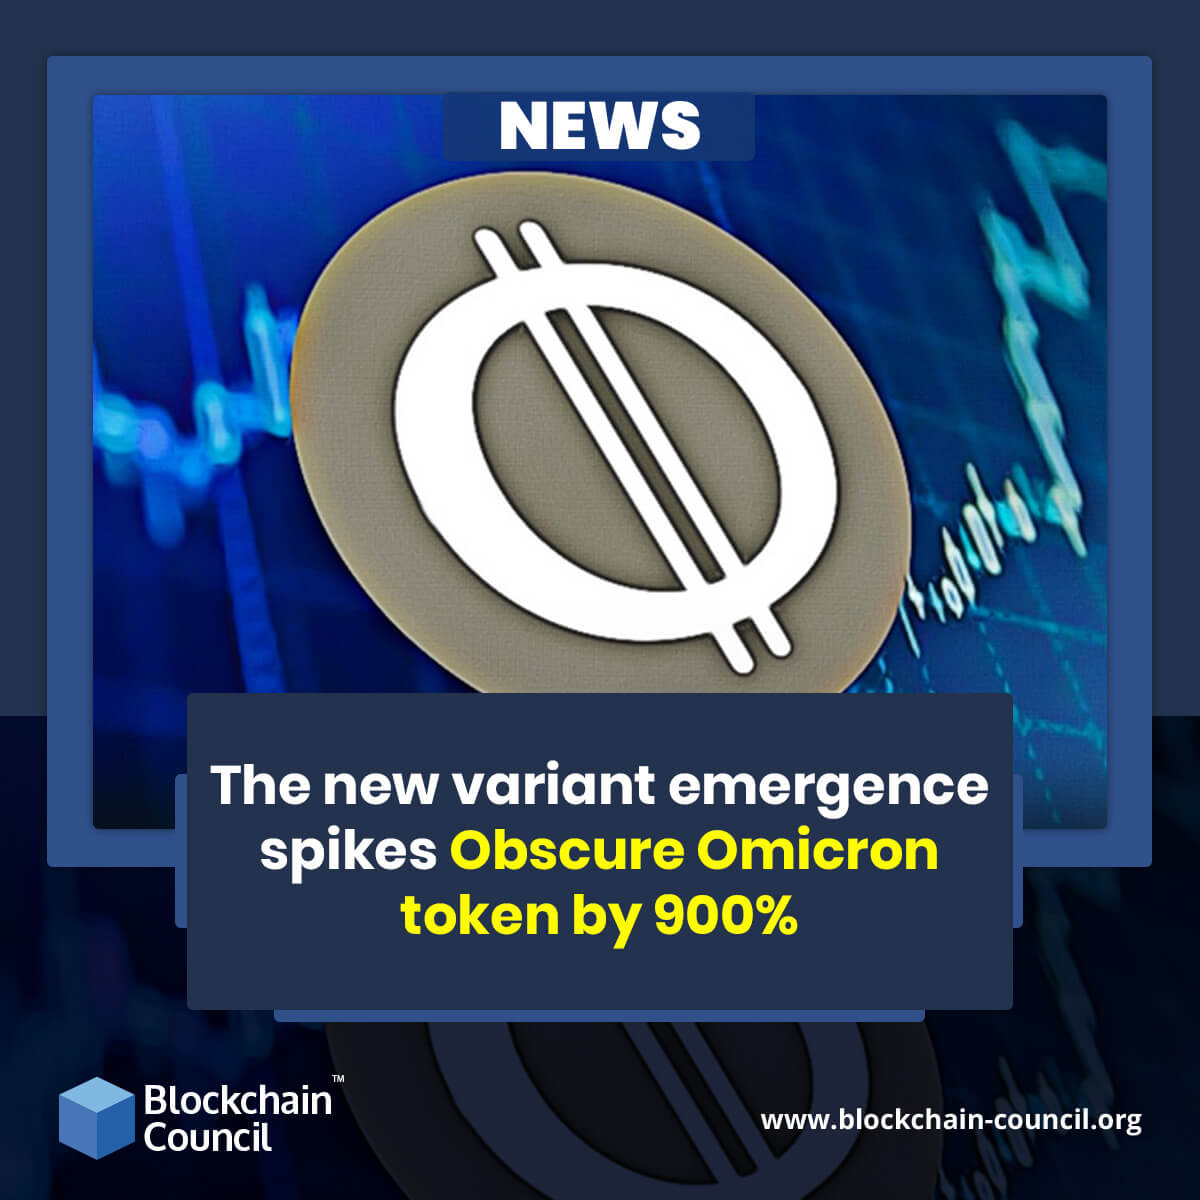 The emergence of new variants makes Obscure Omicron tokens soar by 900%